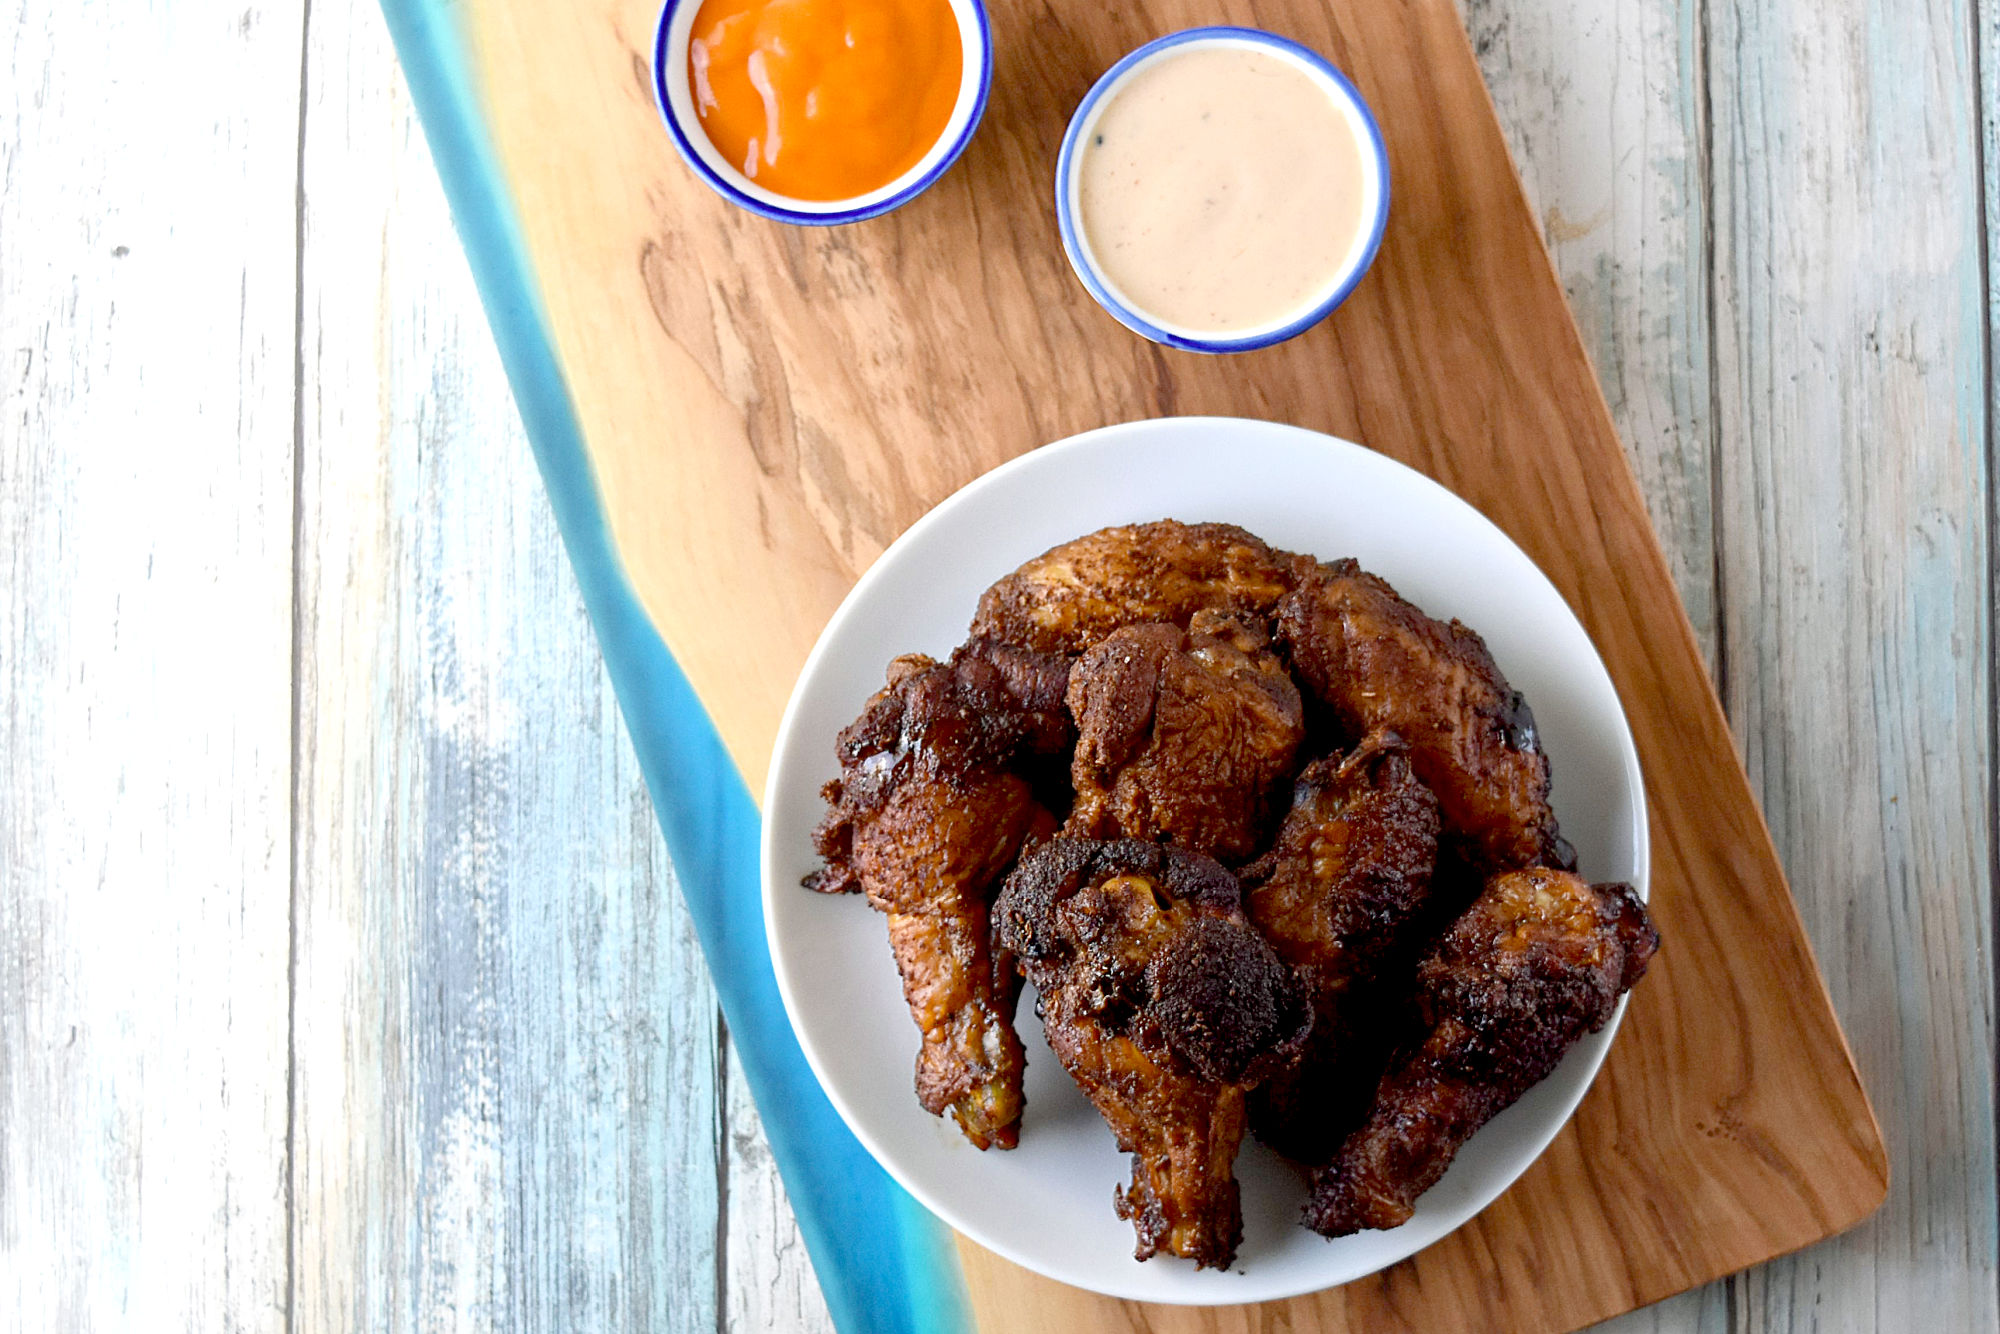 Smoked Old Bay Wings have a light smoky flavor combined with the Old Bay Lemon Garlic flavored seasoning.  They’re a simply delicious way to celebrate Dad on Father’s Day. #OurFamilyTable